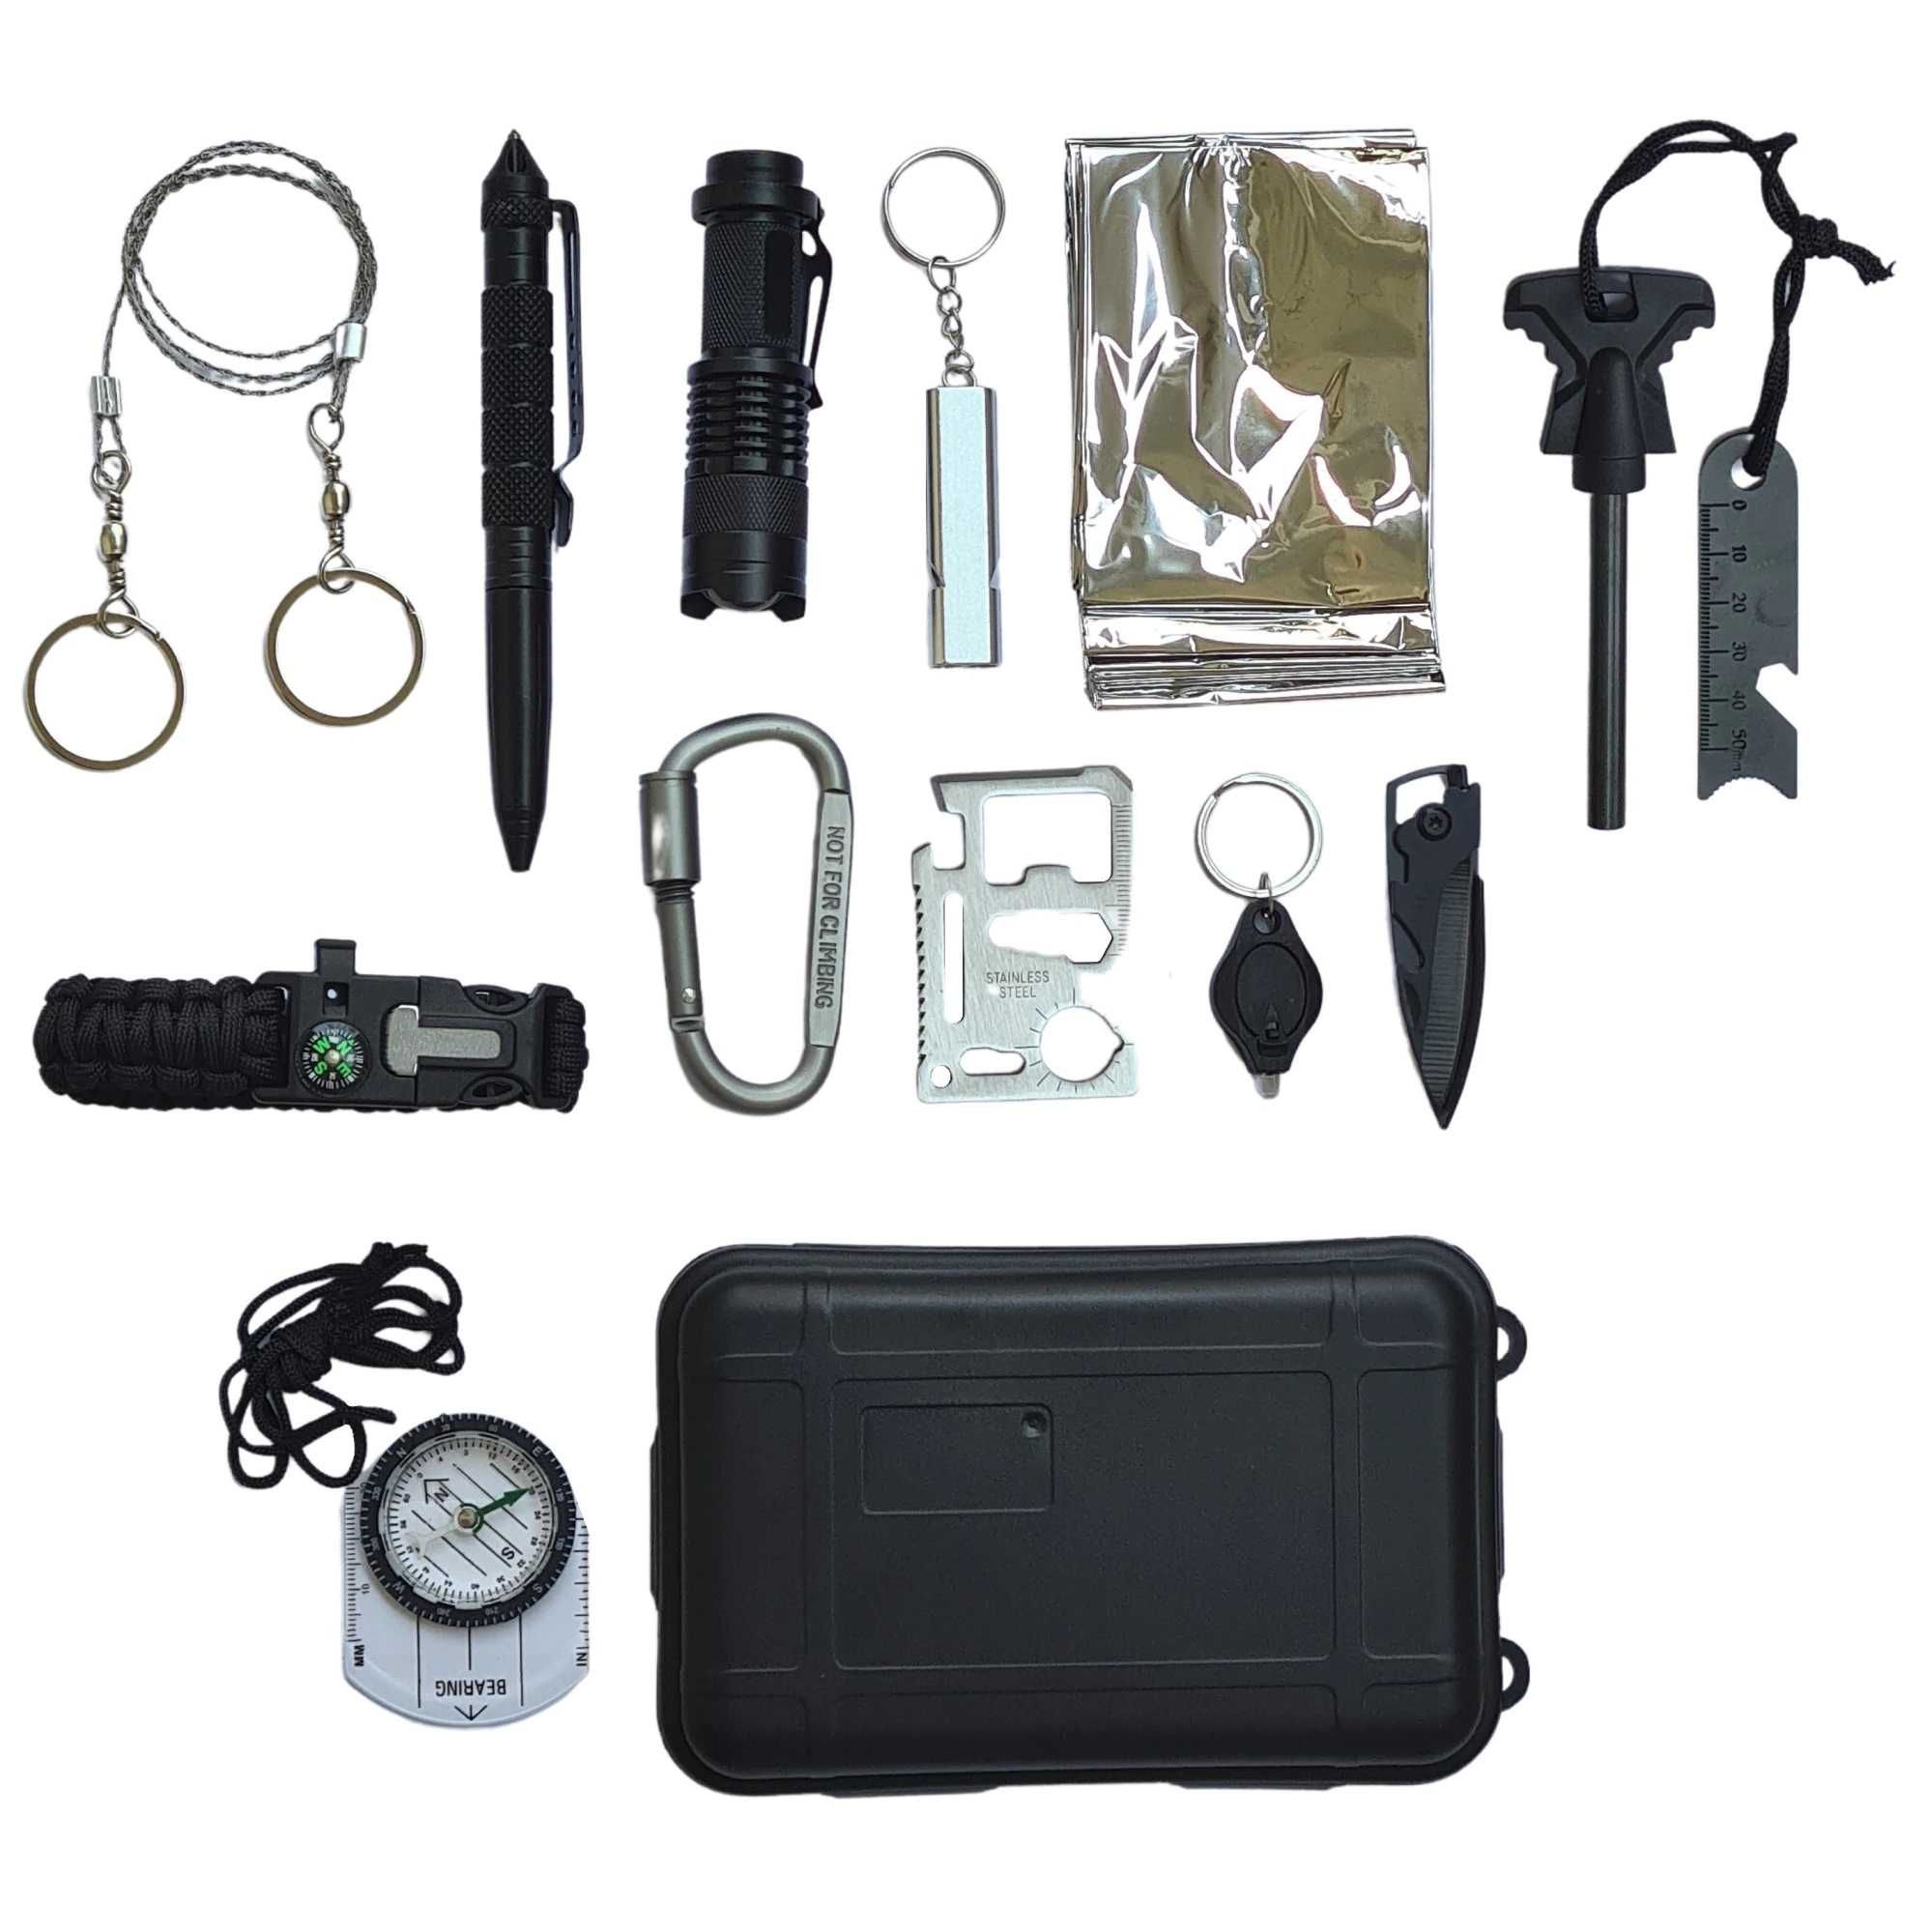 Kit tactic supravietuire TigerClaw, multifunctional 14 in 1